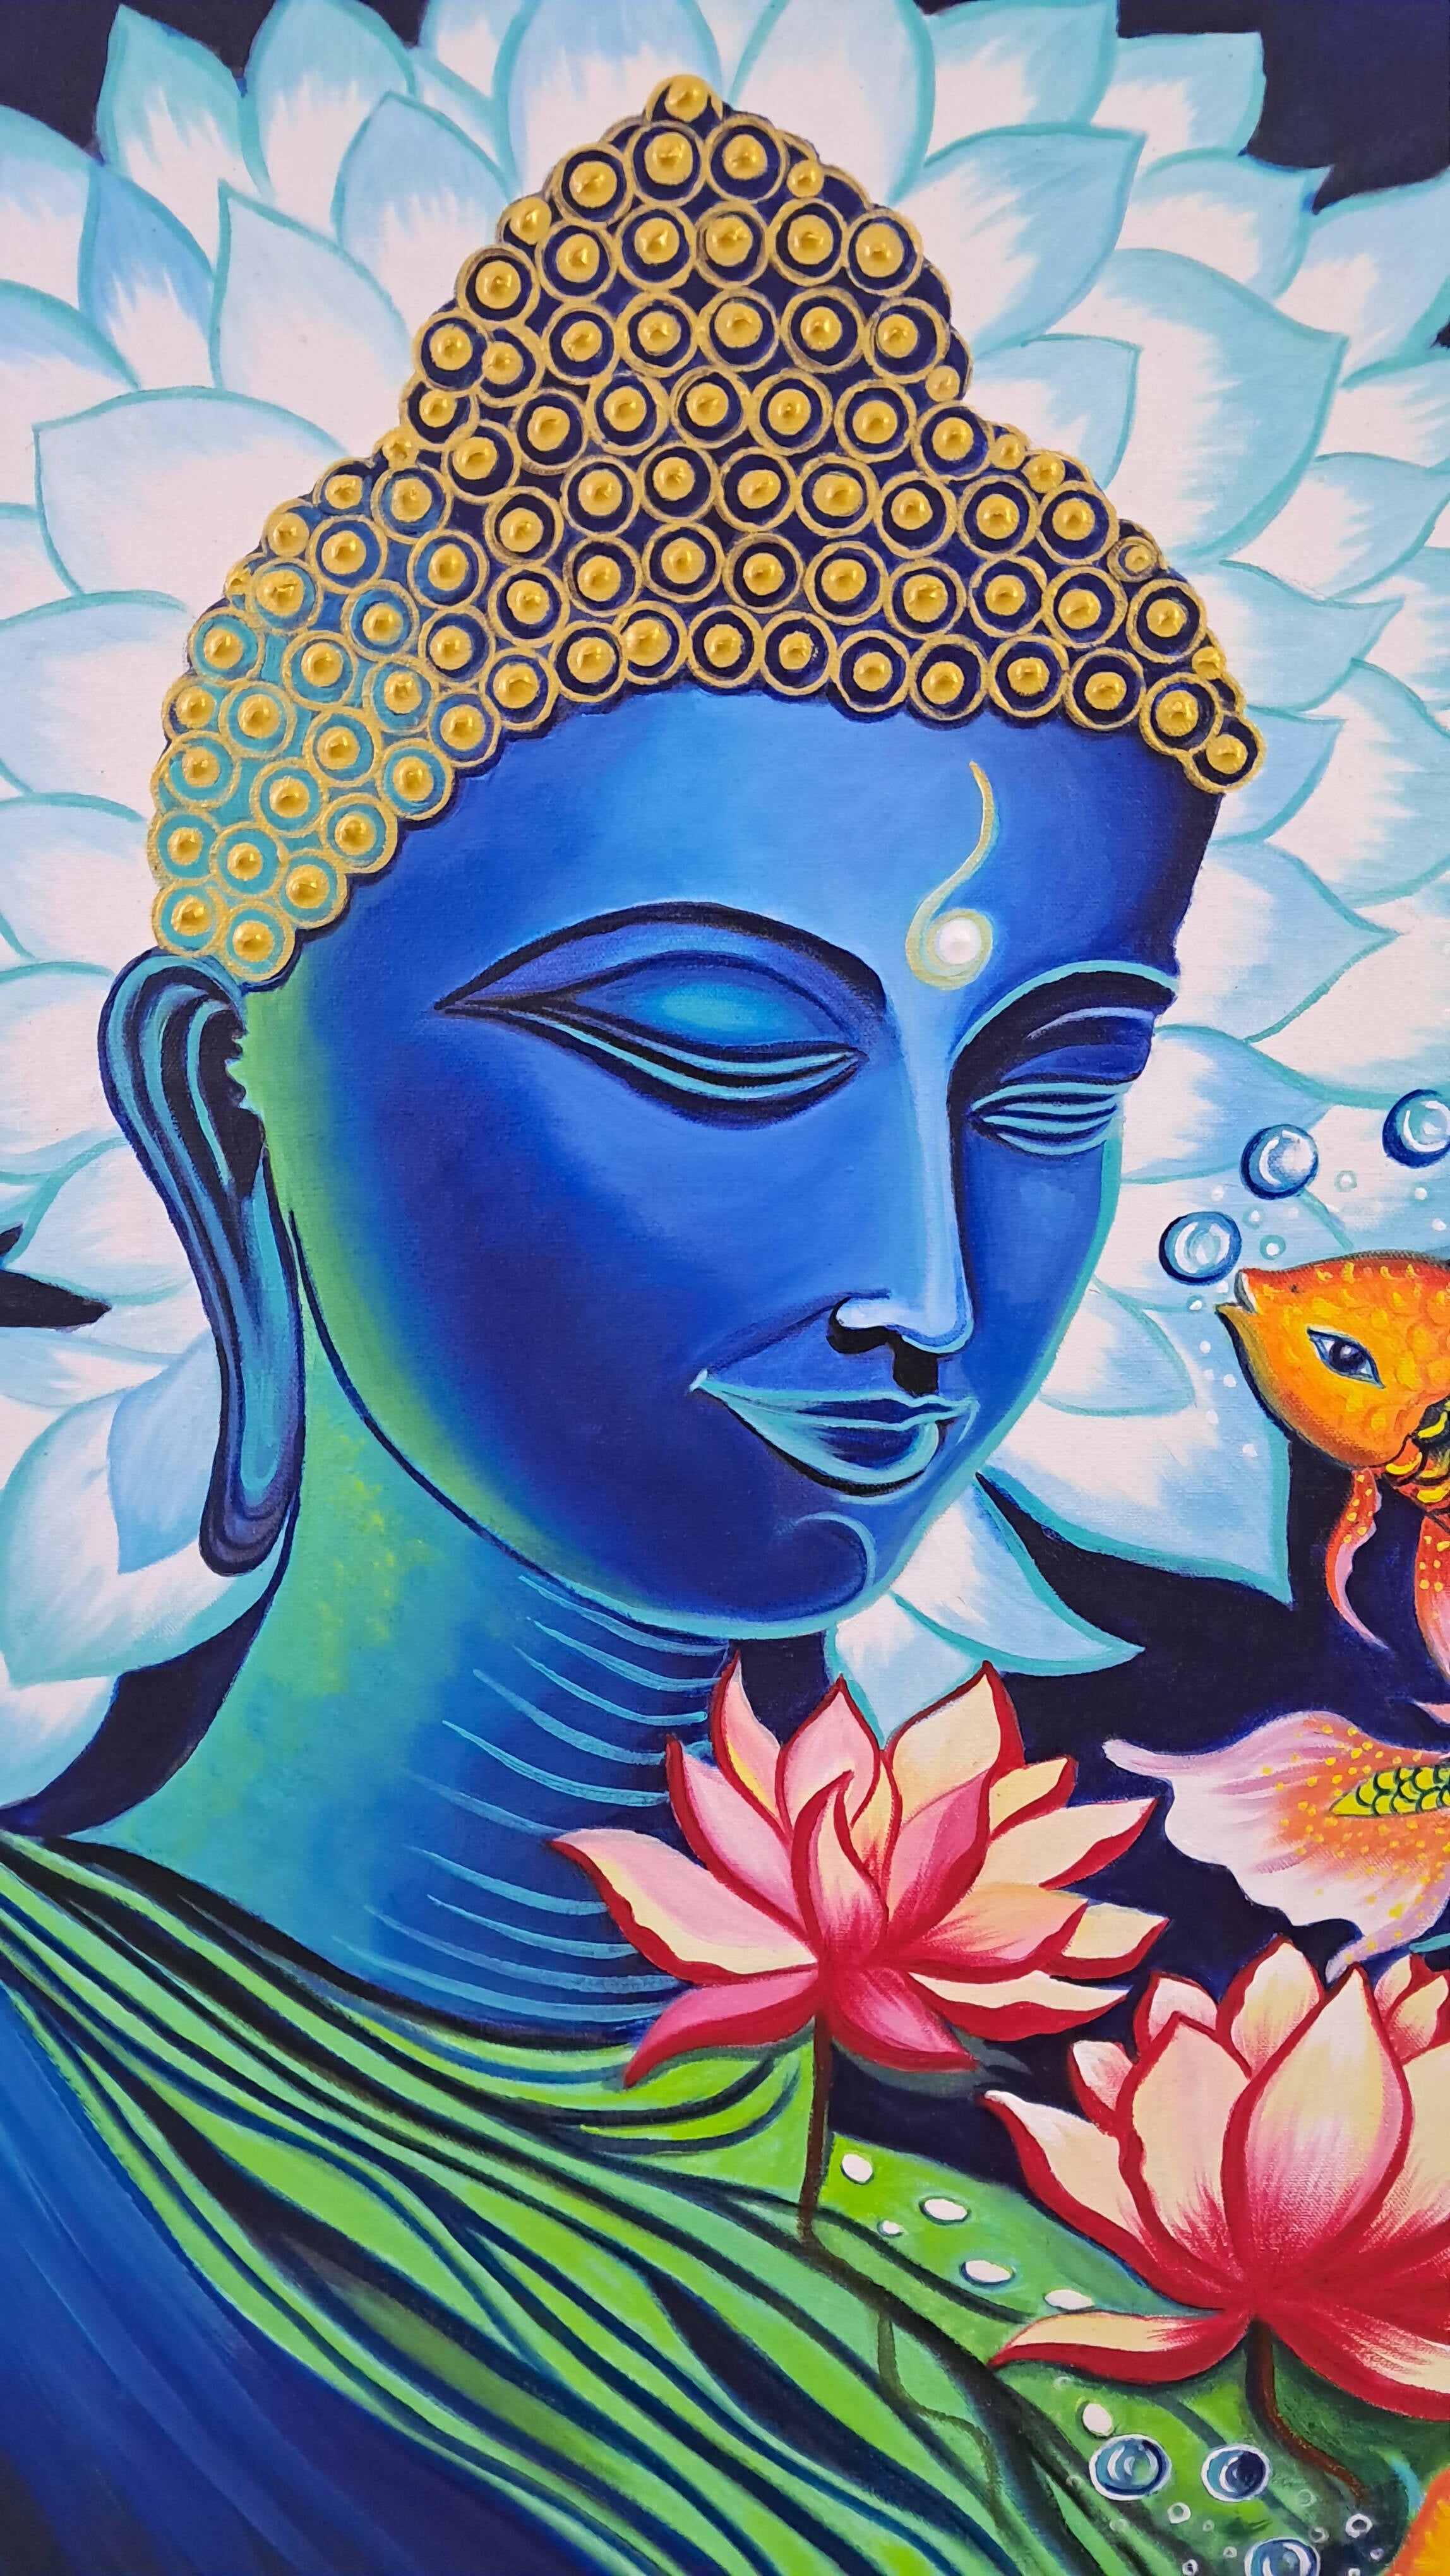 Captivating Lord Buddha Artistry Beneath a Sea of Colorful Fish